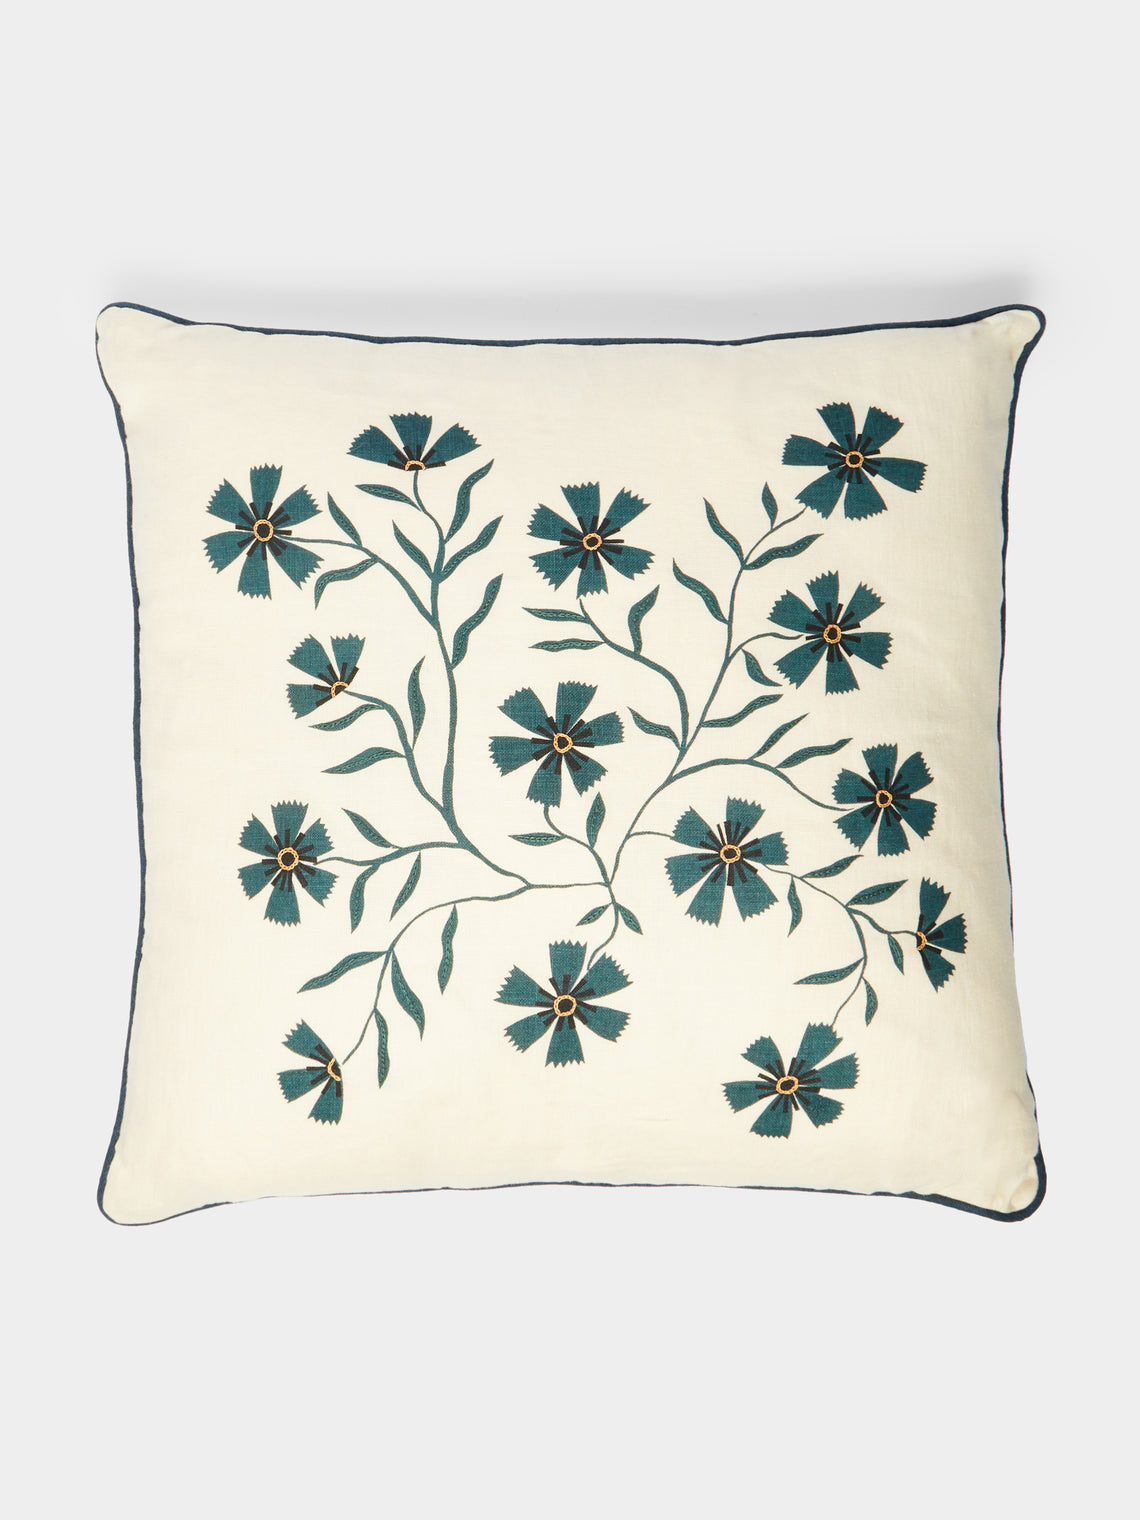 Rosemary Milner - Printed Floral Cotton Cushion -  - ABASK - 